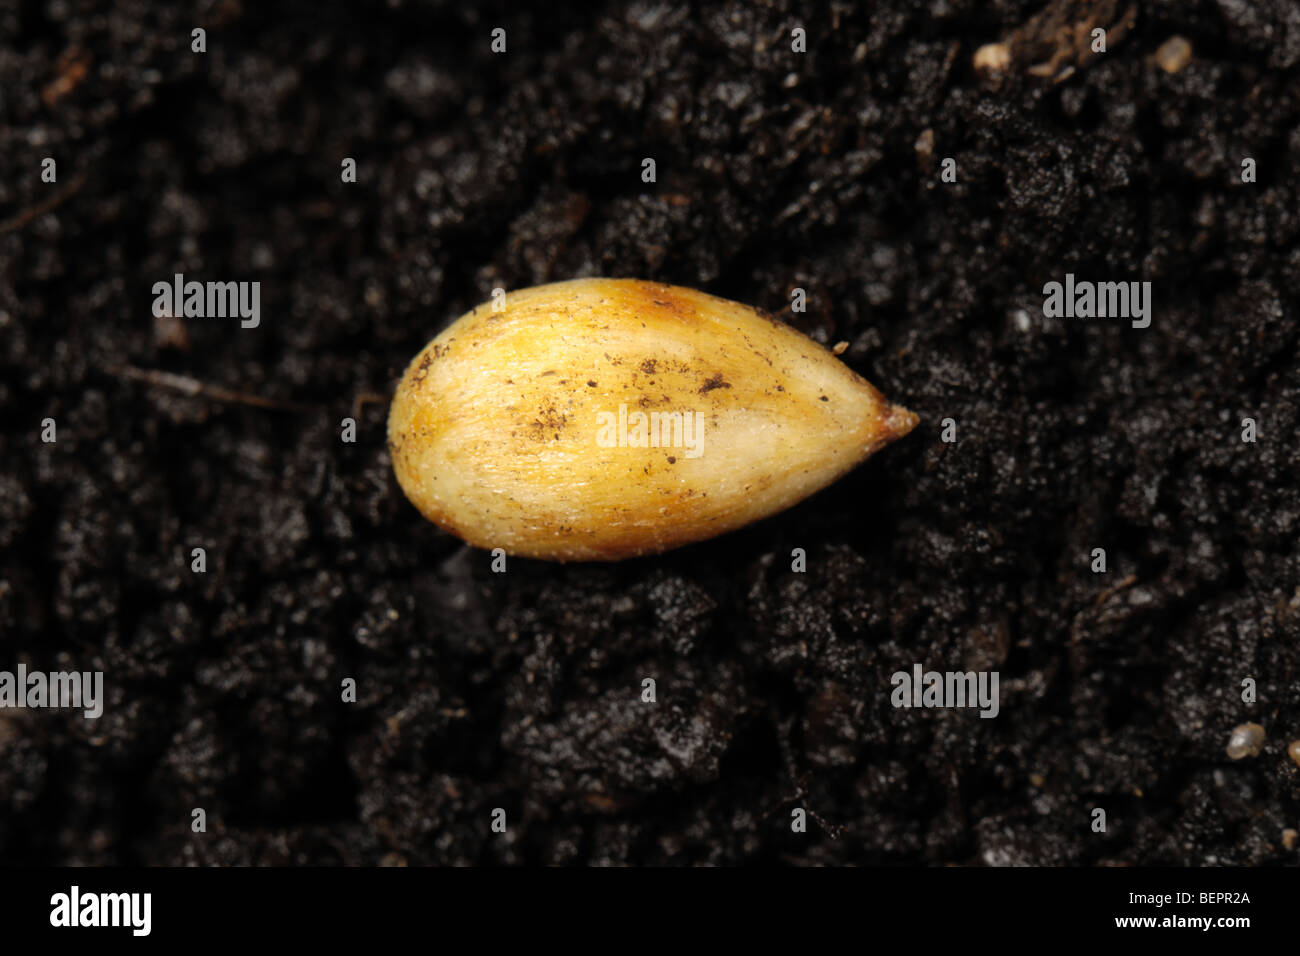 Discovery apple seed on a soil surface Stock Photo